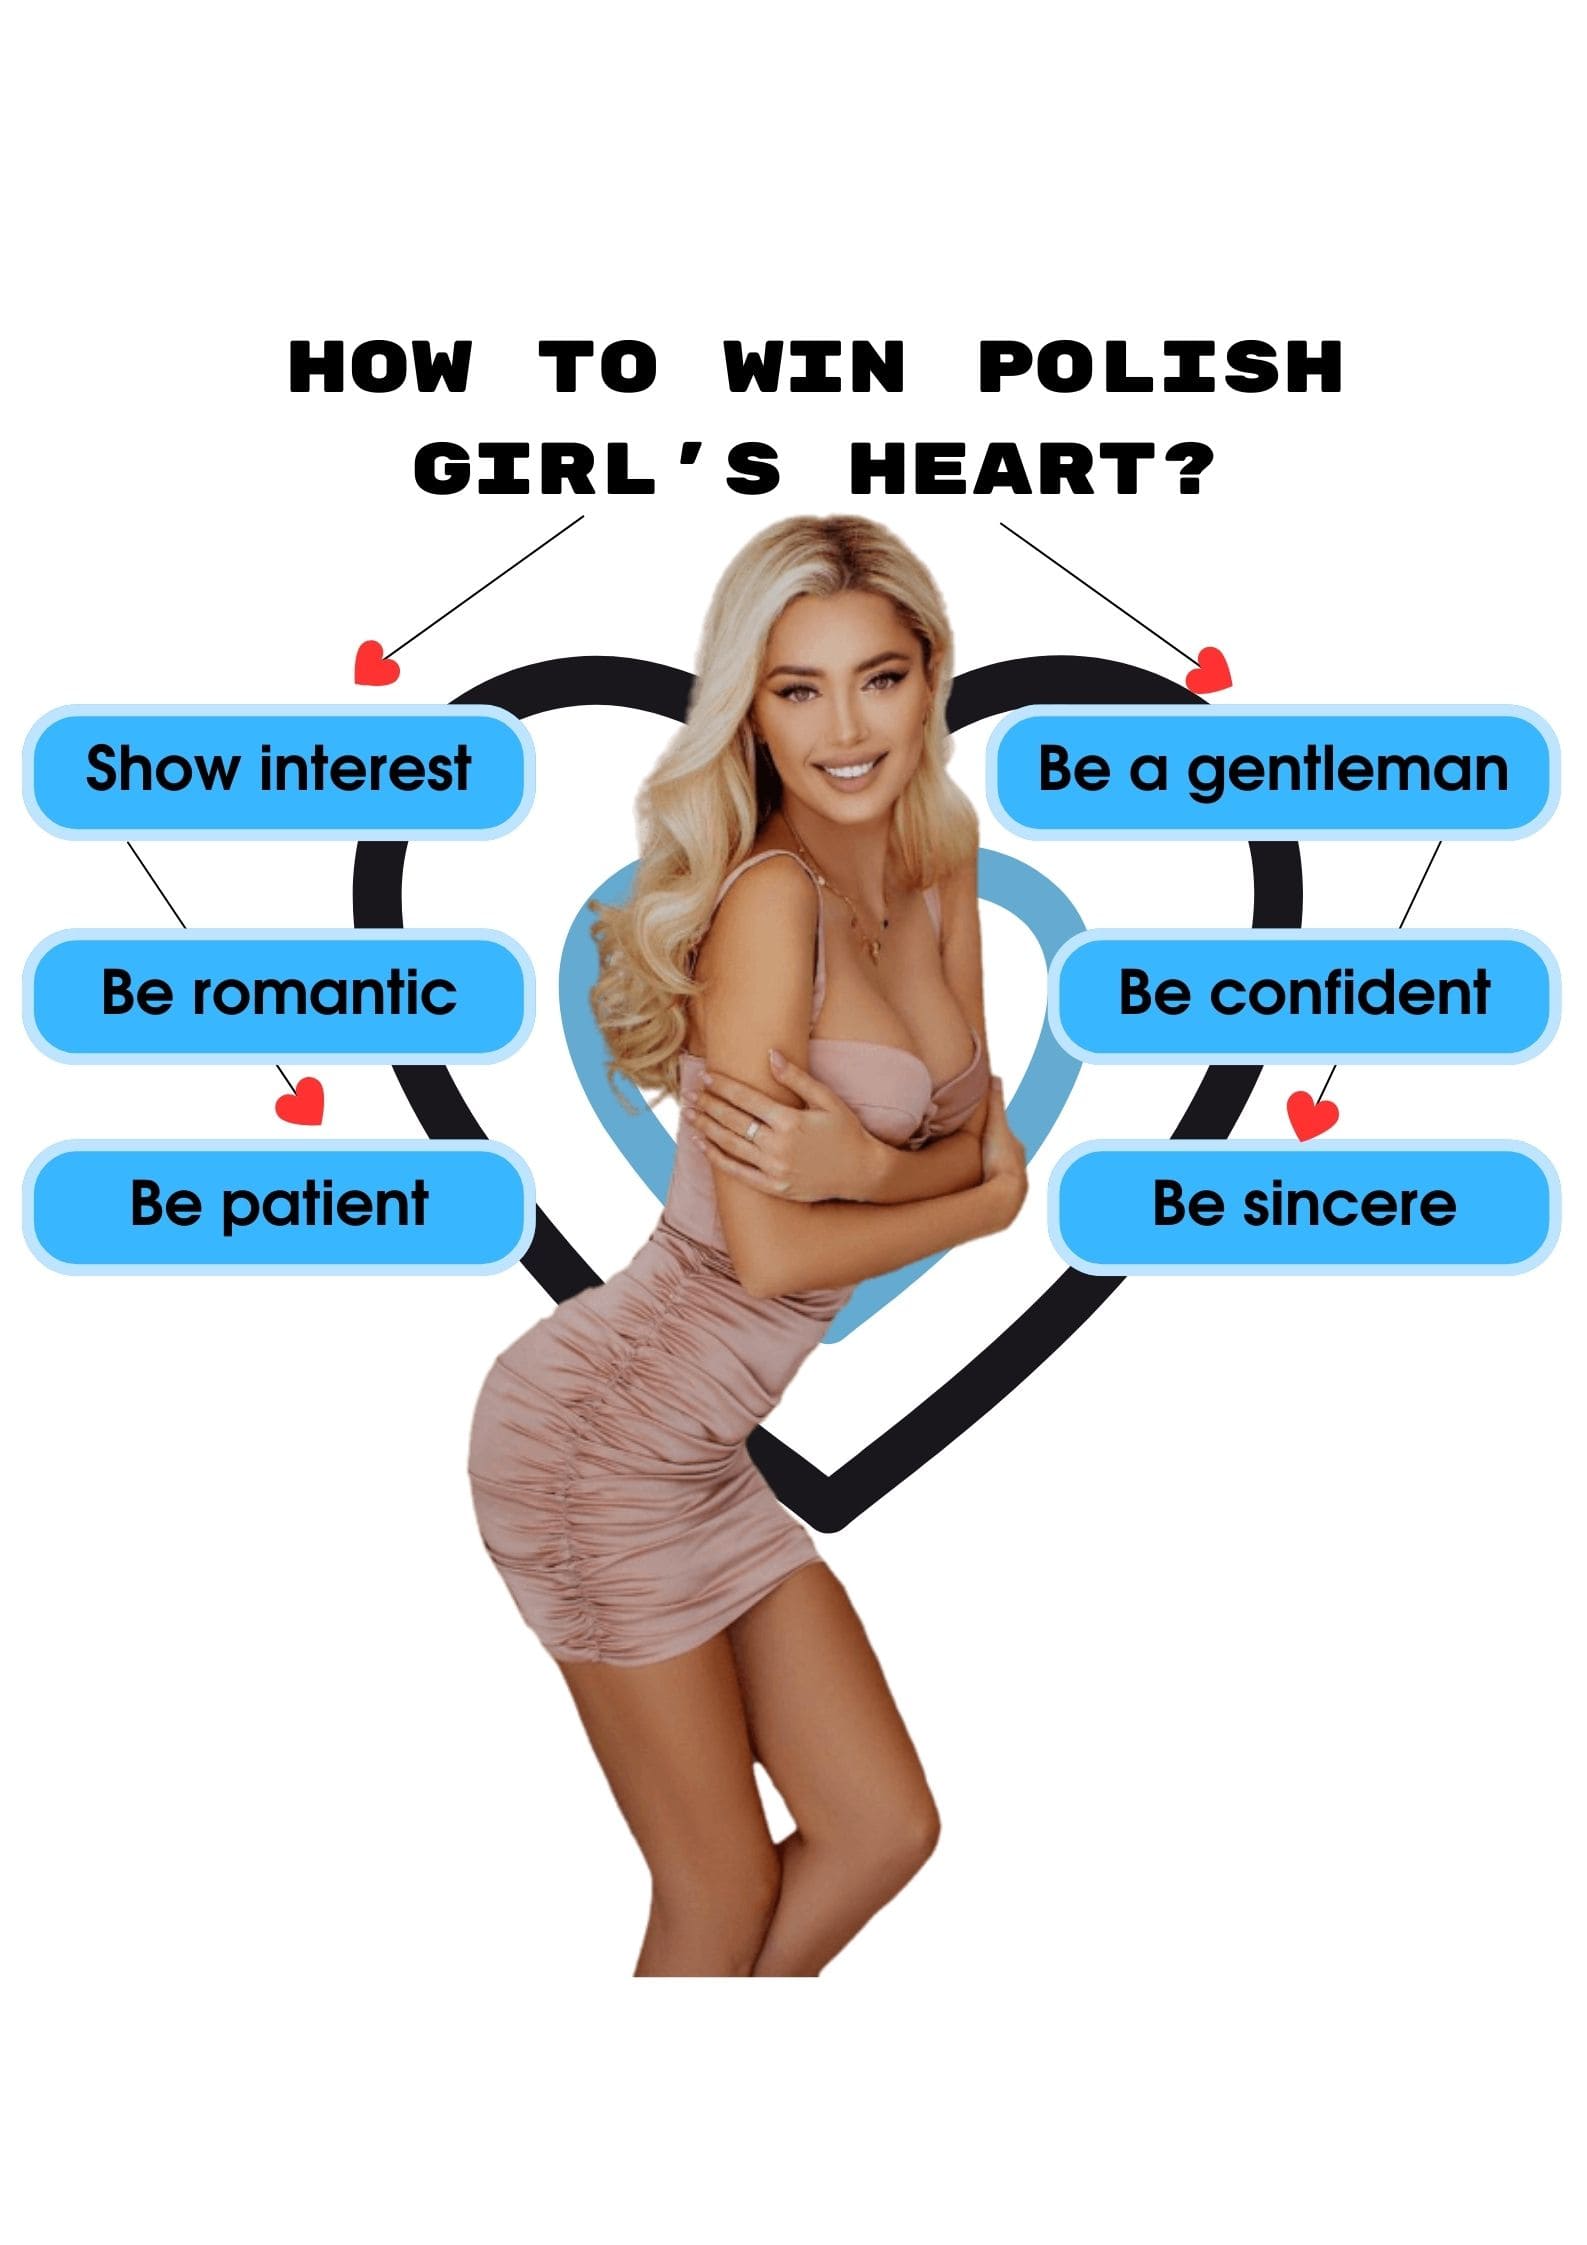 How to win polish girl's heart infographic